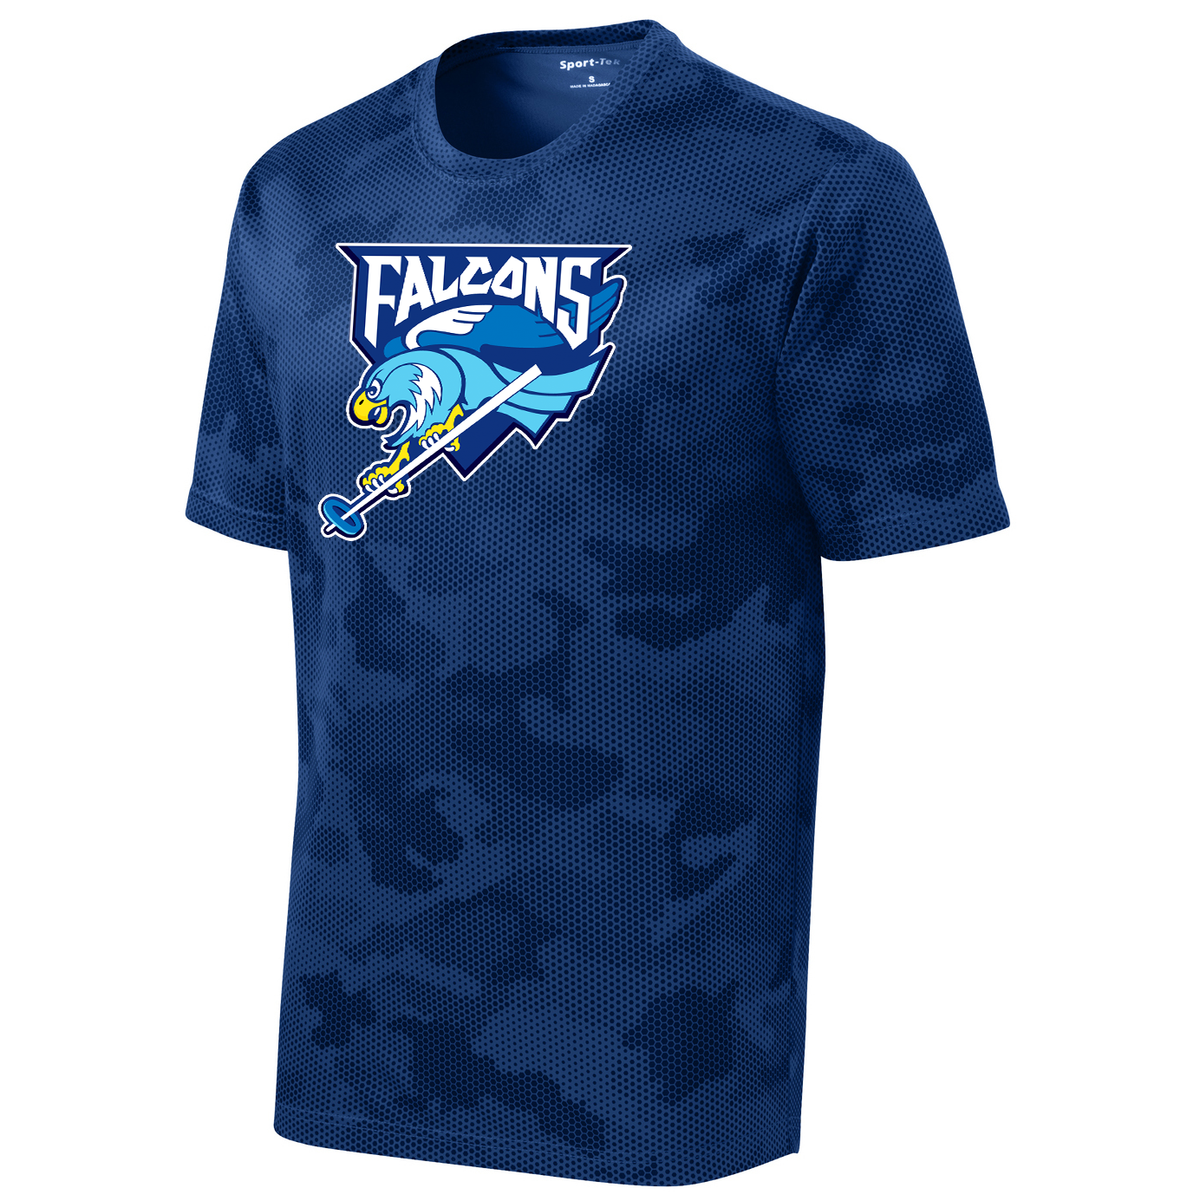 Falcons Ringettes CamoHex Tee